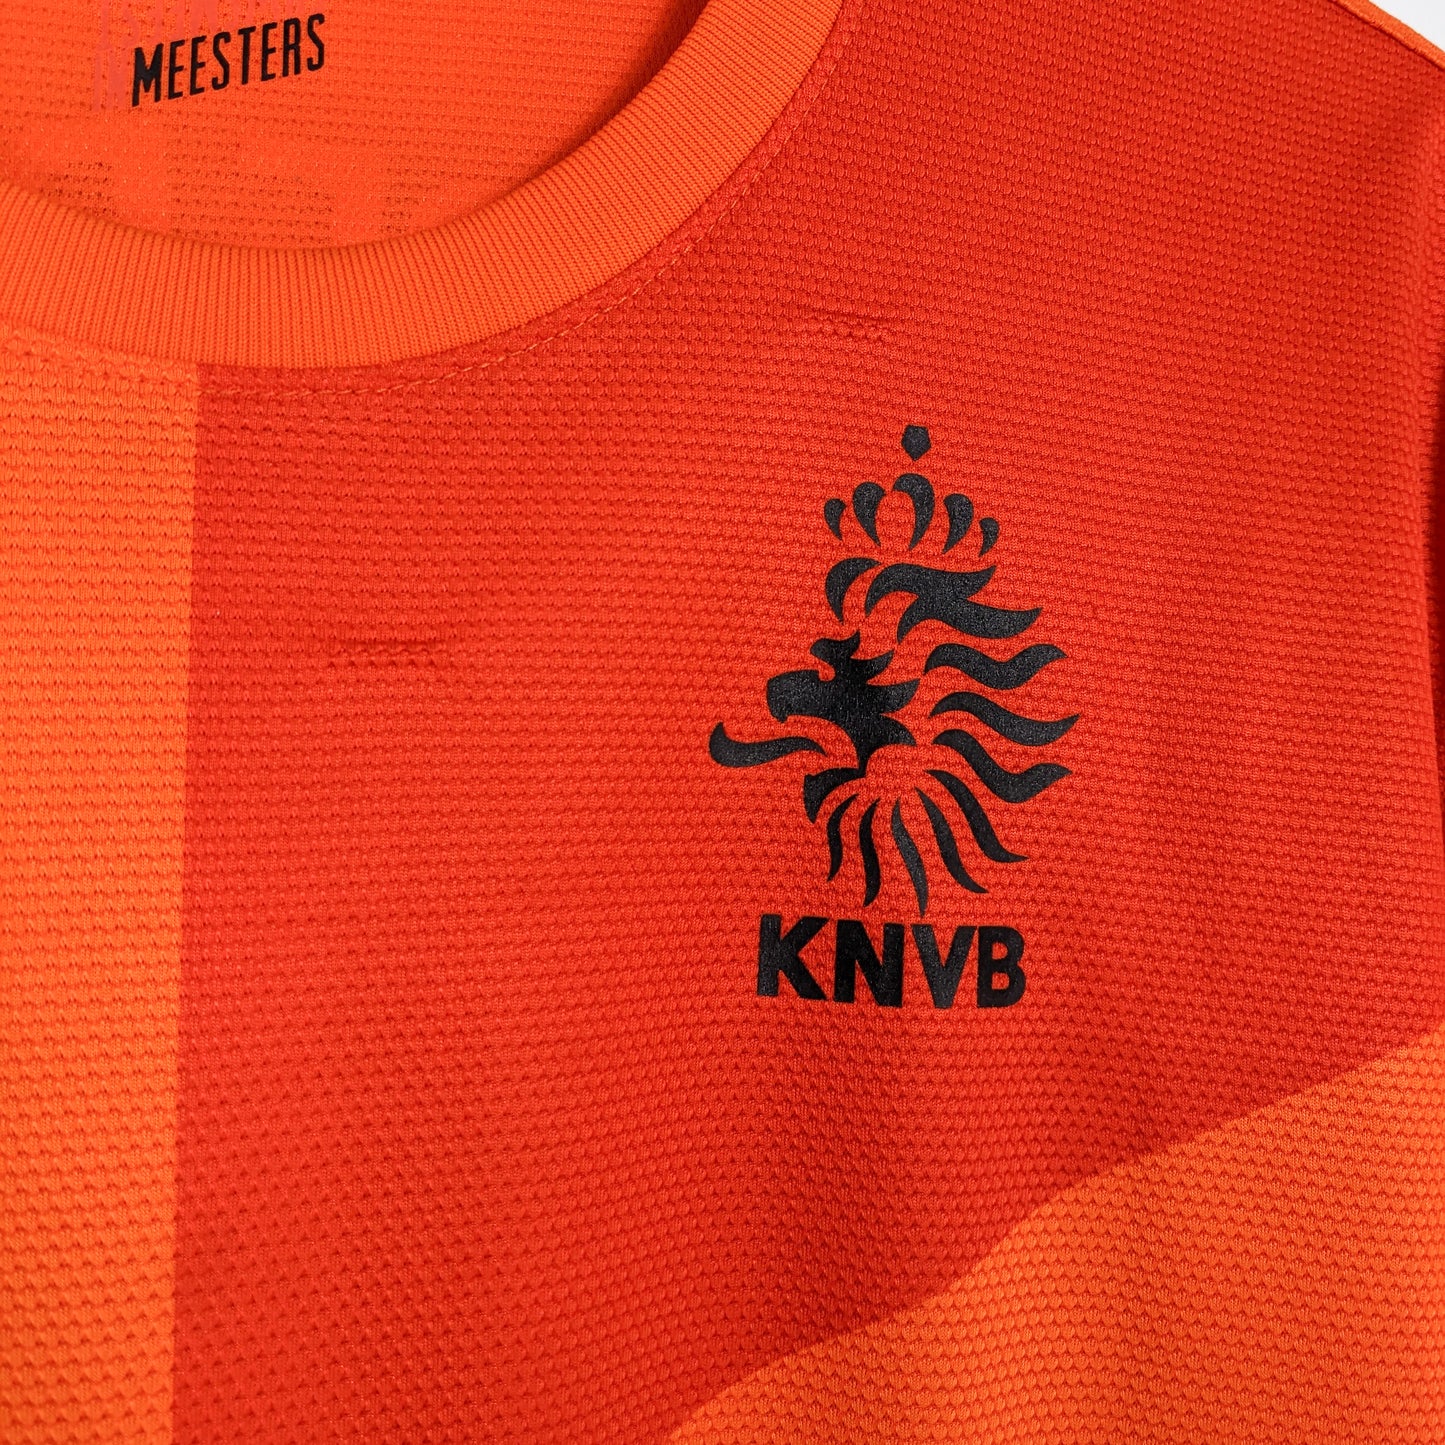 Authentic Netherland 2012 EURO Home - RVP #19 Size L